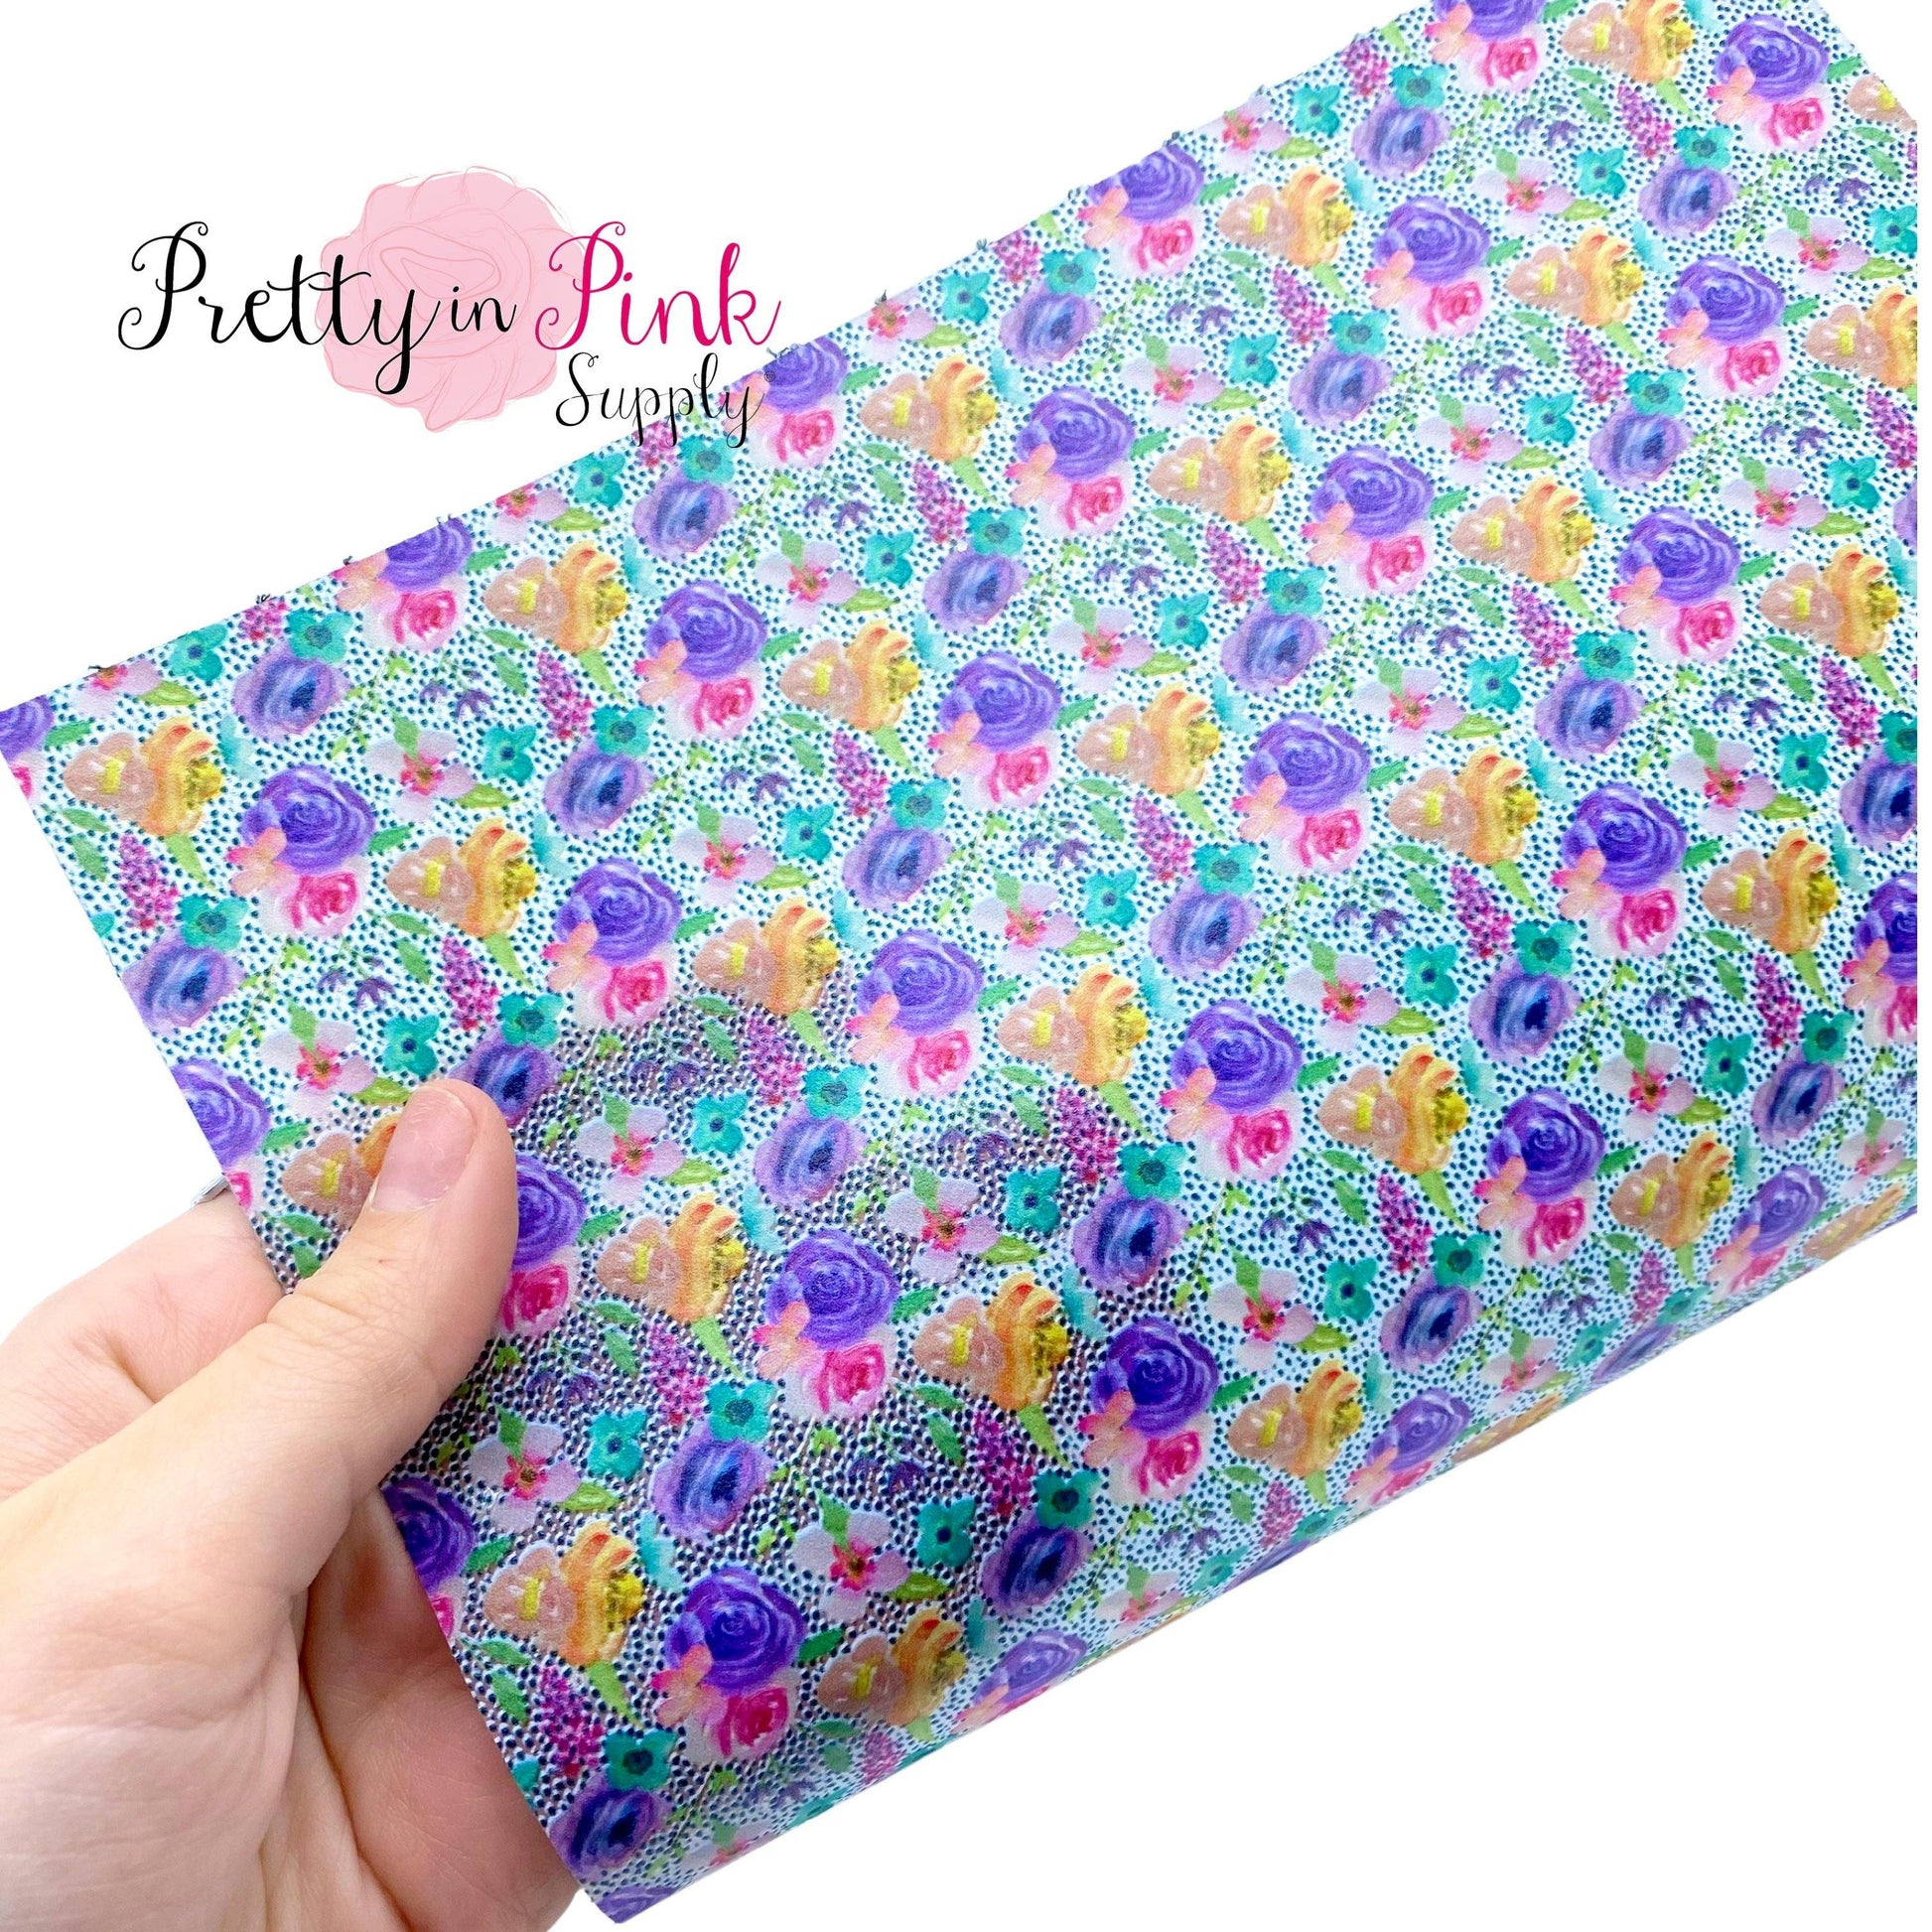 Polka Dot Spring Floral | Jelly Sheet - Pretty in Pink Supply